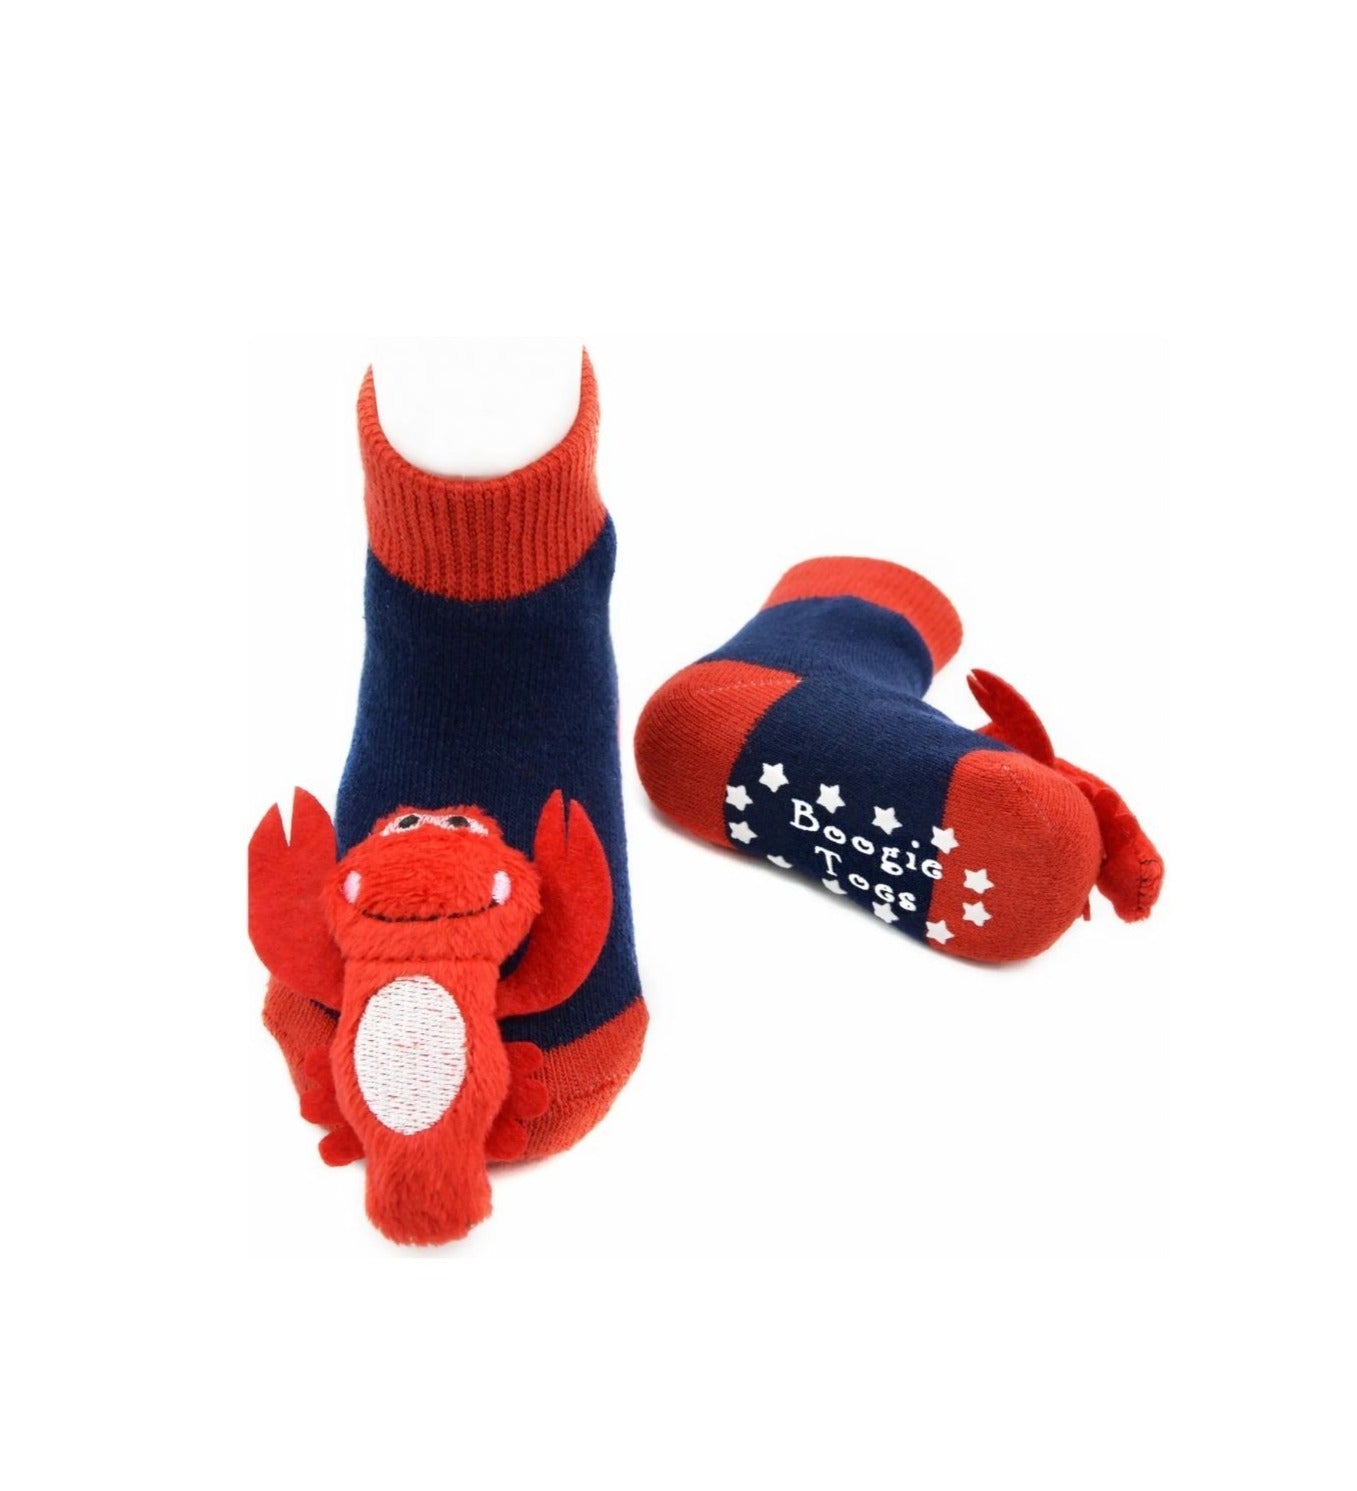 navy socks with red trim at ankle, red on toes, and red plush lobsters on each foot